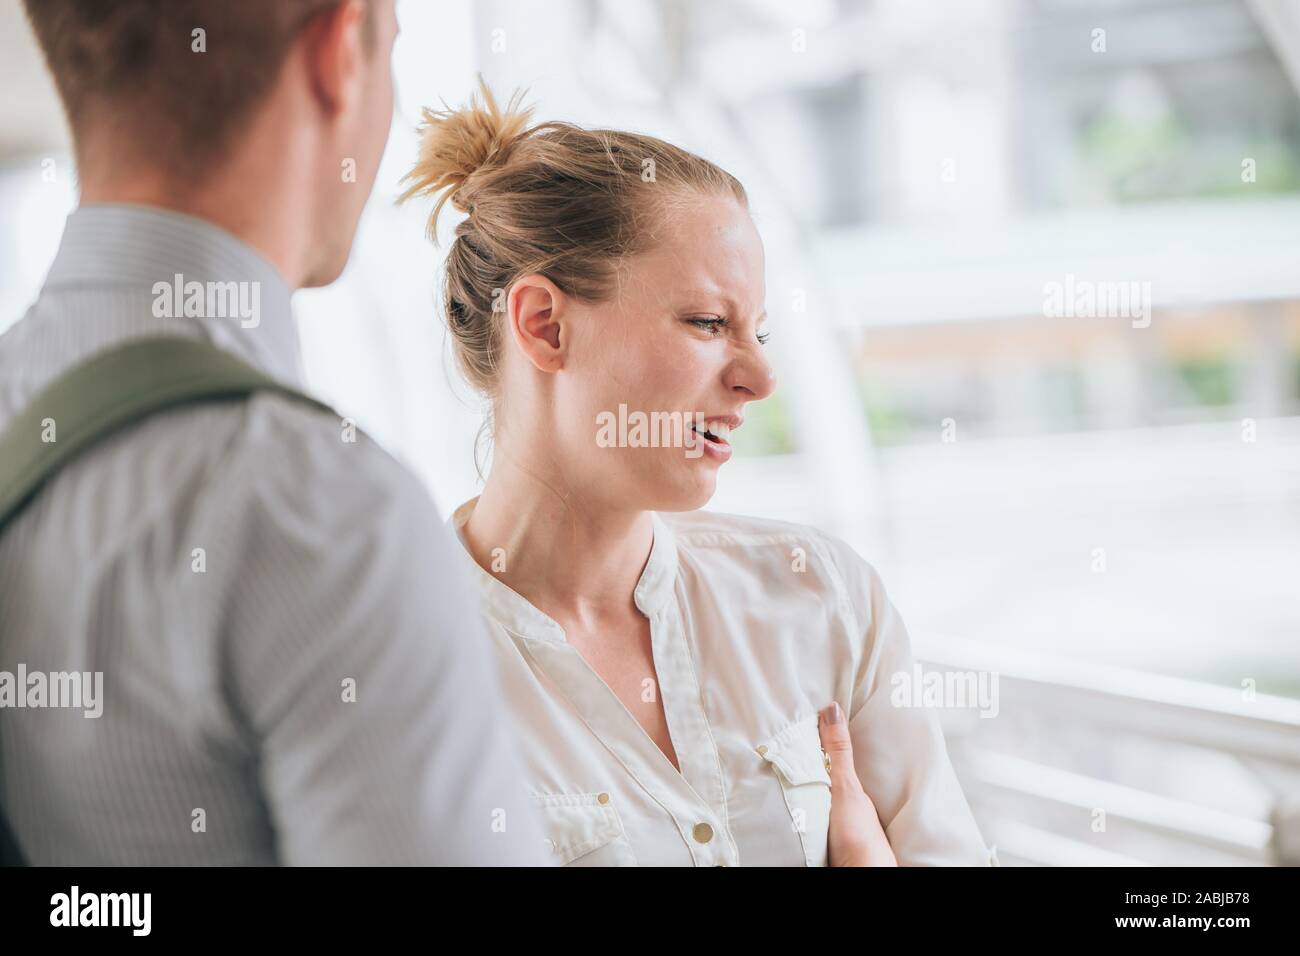 Couple argue, Woman angry and crying expression when quarrel serious talking with her boy friend do mistake. Stock Photo